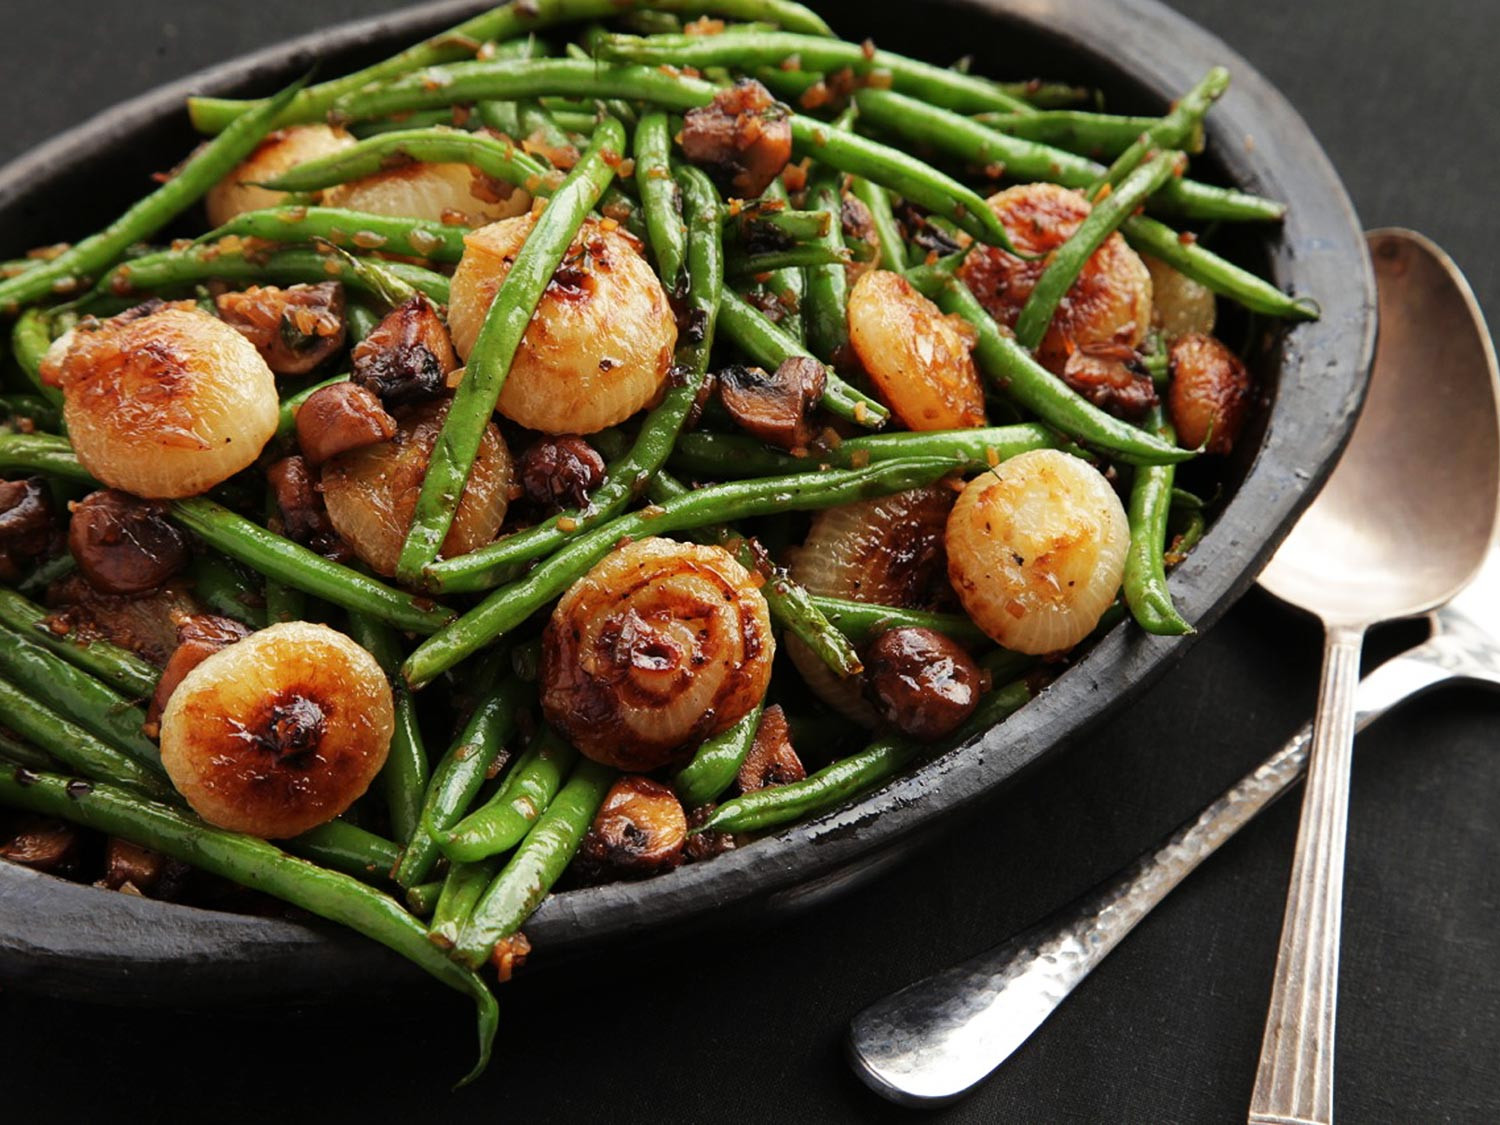 Best Green Bean Recipe For Thanksgiving
 Sautéed Green Beans With Mushrooms and Caramelized